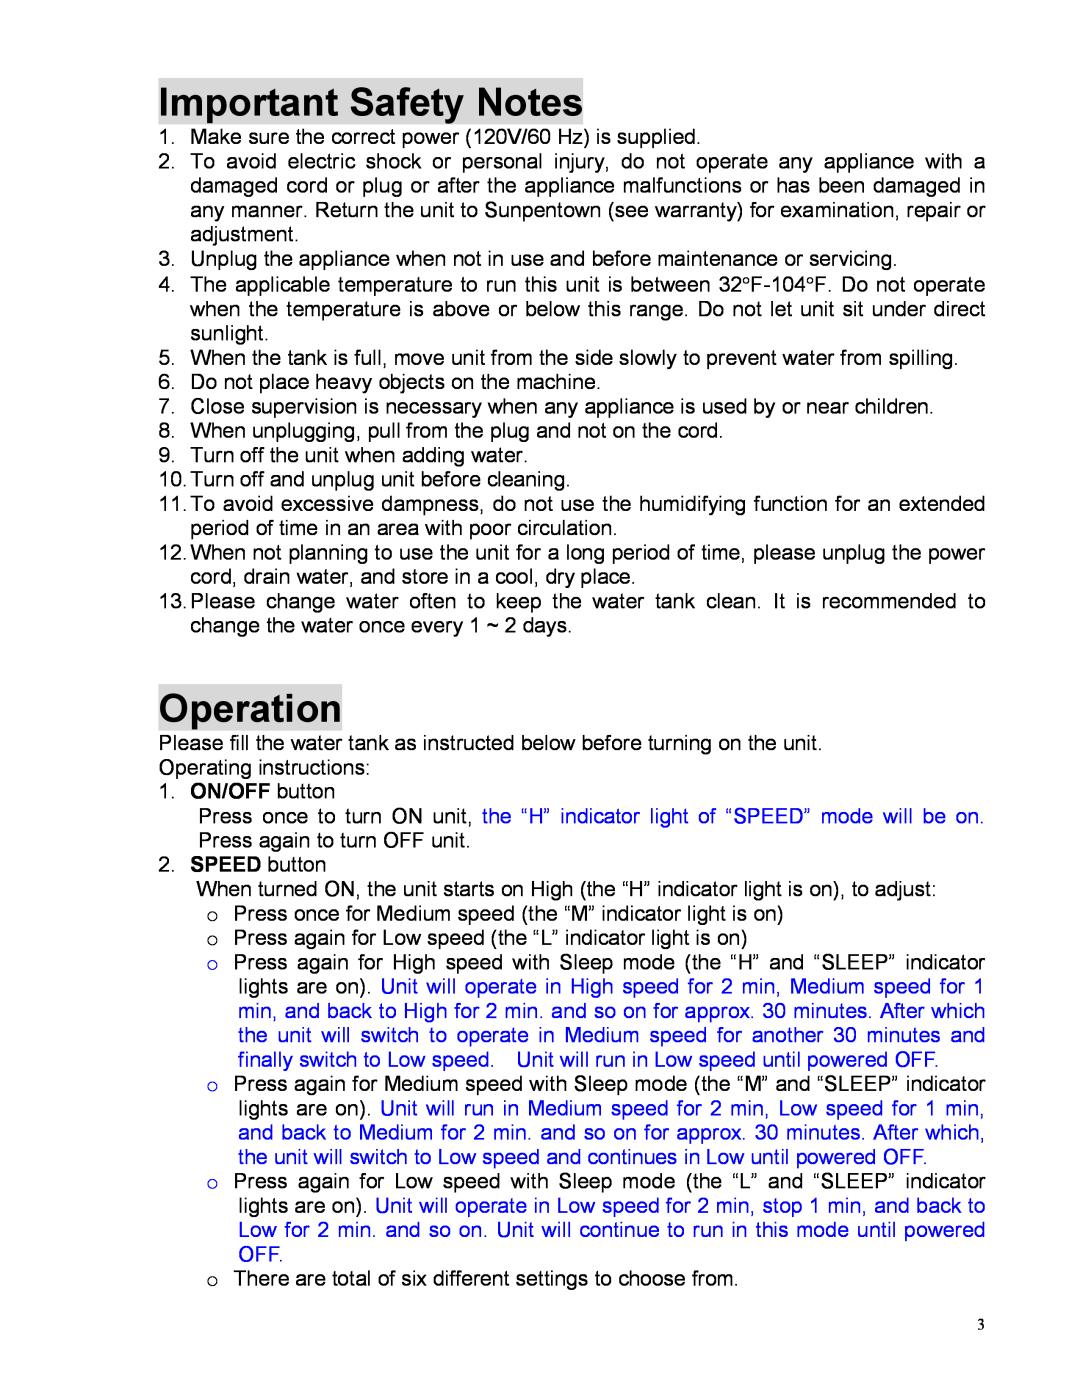 Sunpentown Intl SF-609 instruction manual Important Safety Notes, Operation 